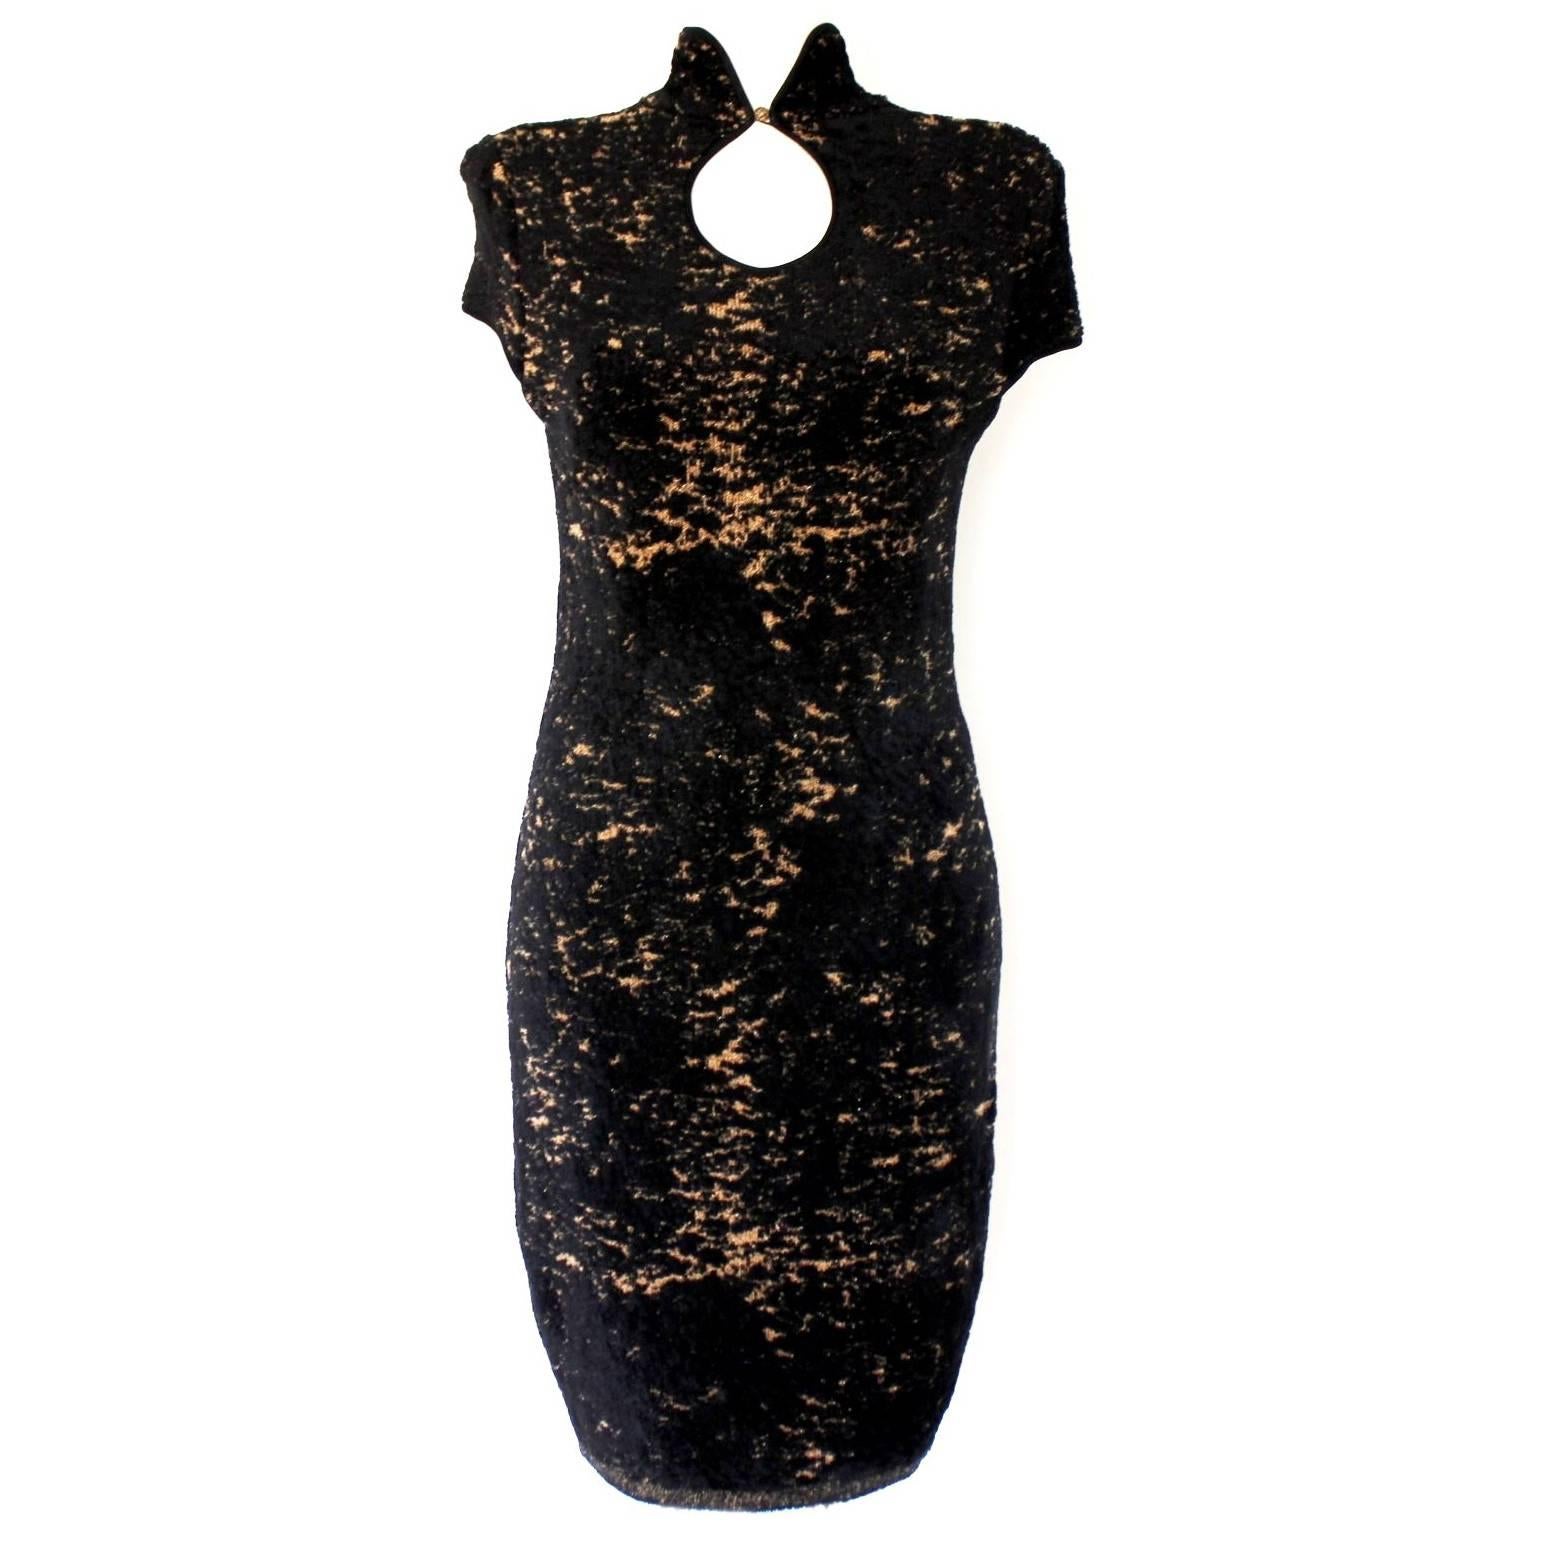 Chanel Black and Gold Chenille Chinese Cheongsam Inspired Dress